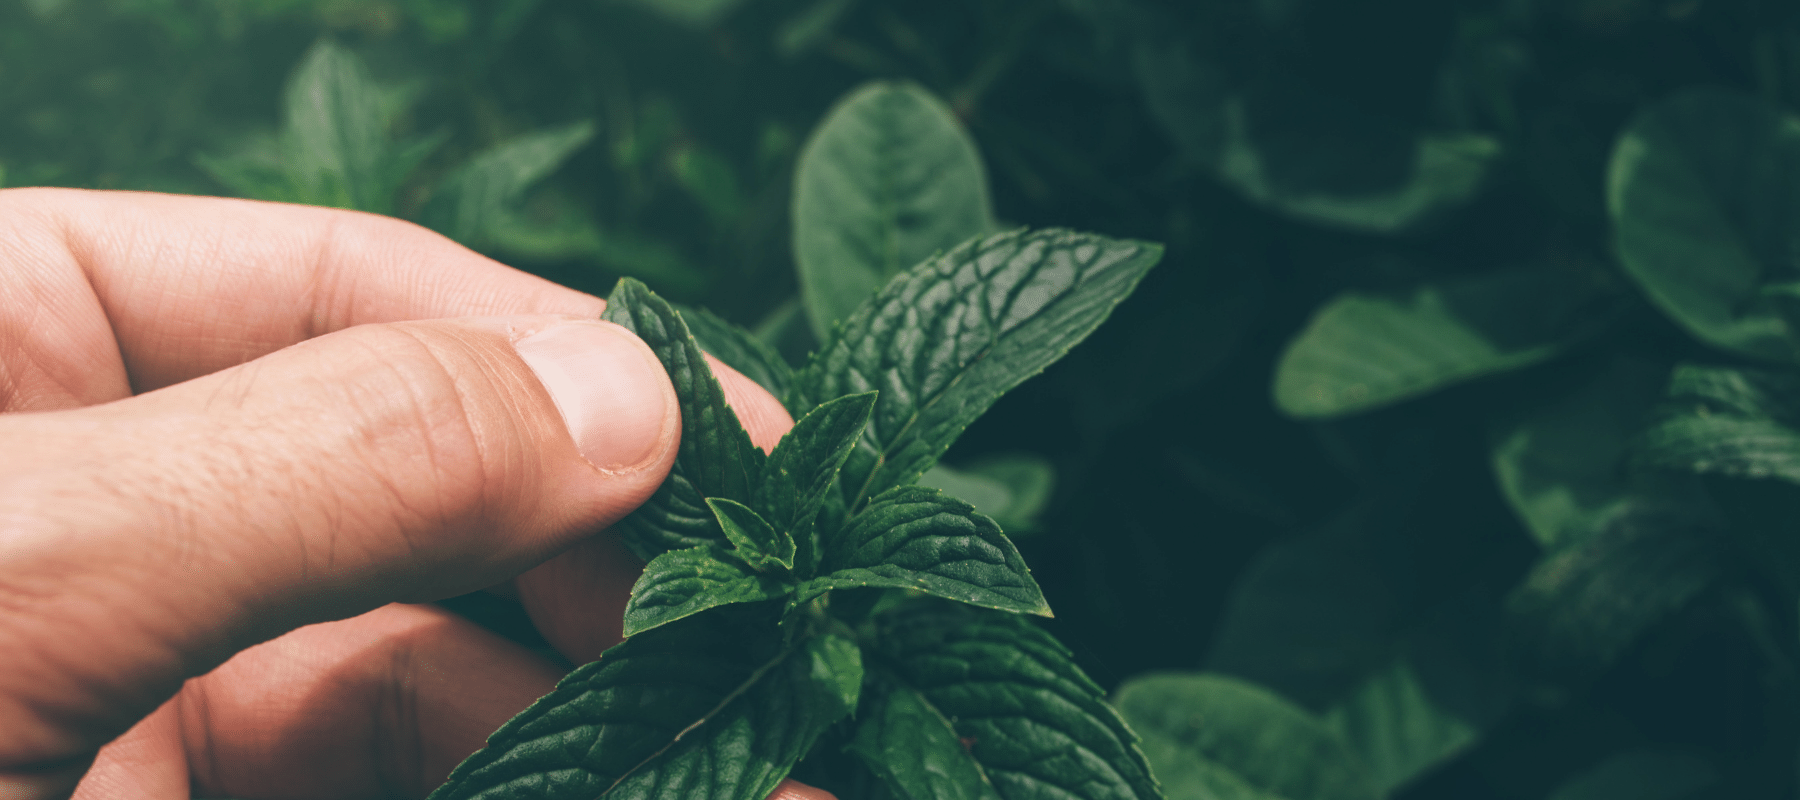 Hand Holding a Green Peppermint Plant